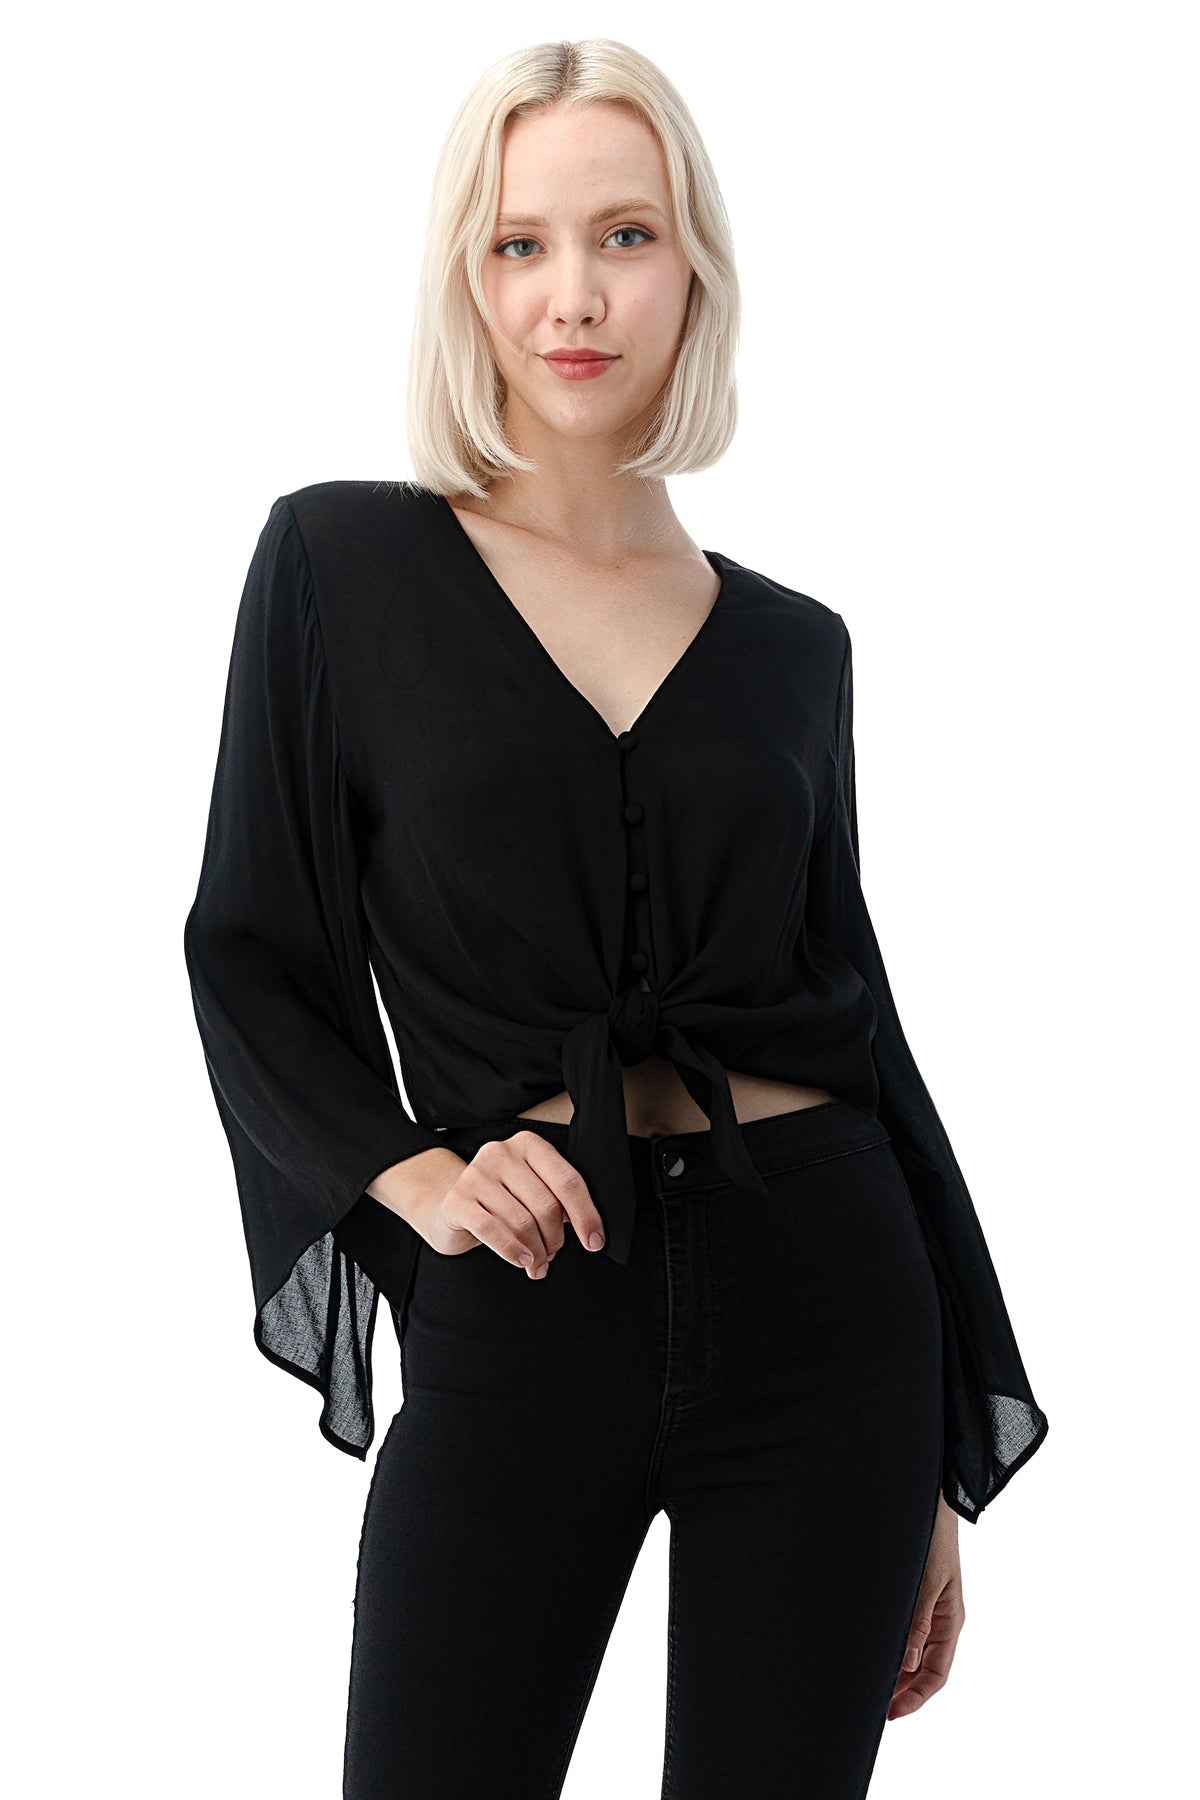 EDGY Land Girl's and Women's Self Tie Bottom Buttoned Chest Slited Bell Sleeve Fashion Blouse